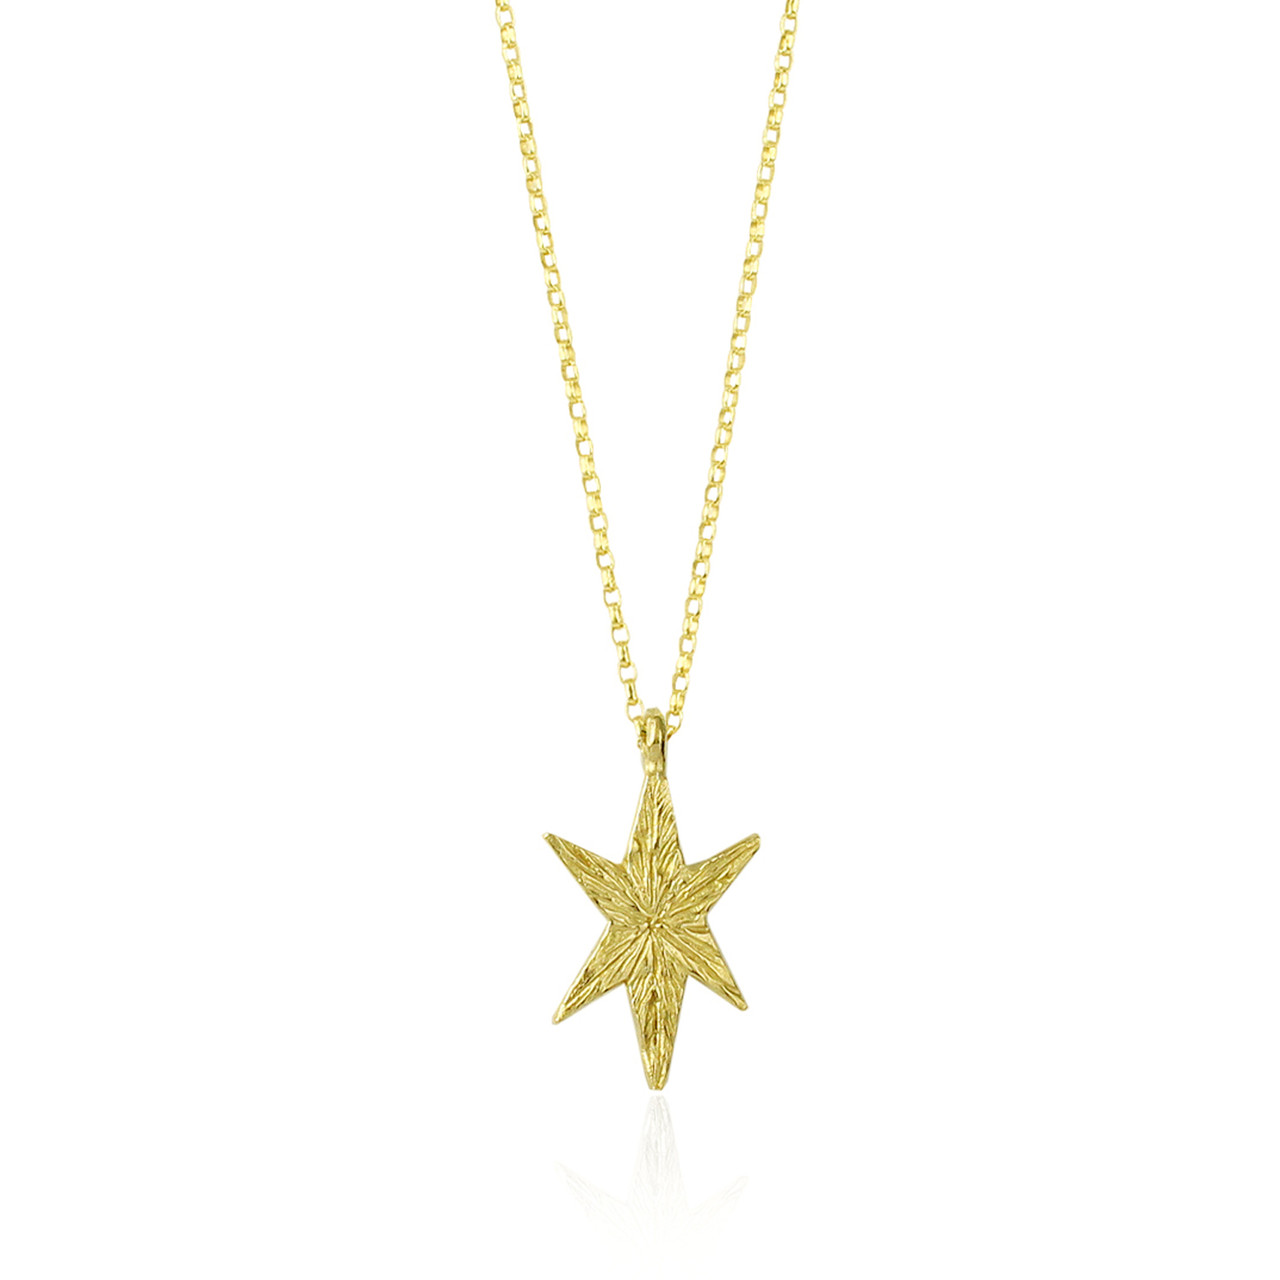 Buy North Star Pendant Necklace for Women, Silver North Star Necklace With  Cubic Zirconia Stones, Sparkly Star Necklace for Women and Teen Girls  Online in India - Etsy